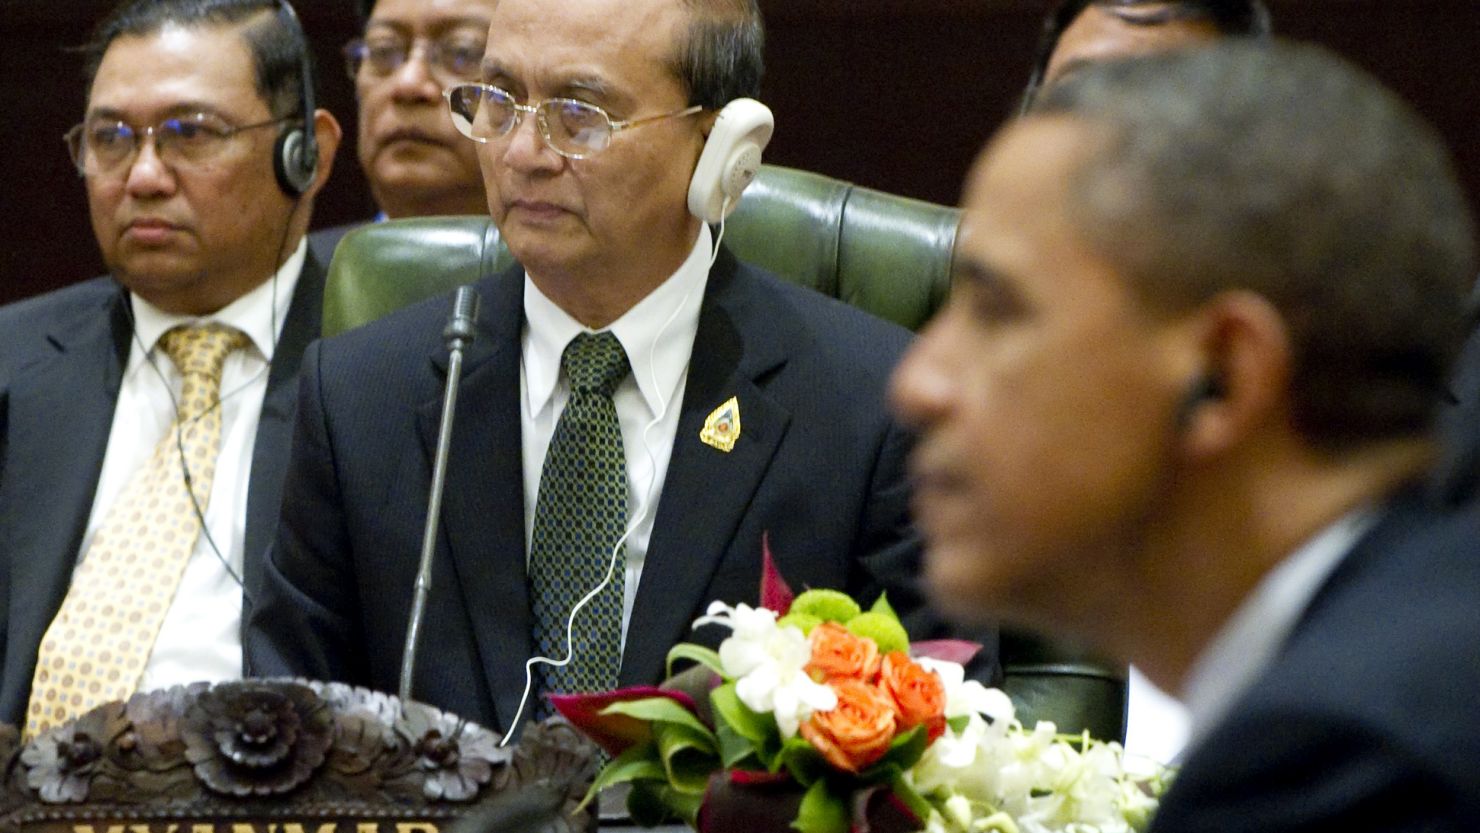 A file image shows U.S. President Barack Obama and Myanmar President Thein Sein at an ASEAN meeting in Bali, Nov. 2011.